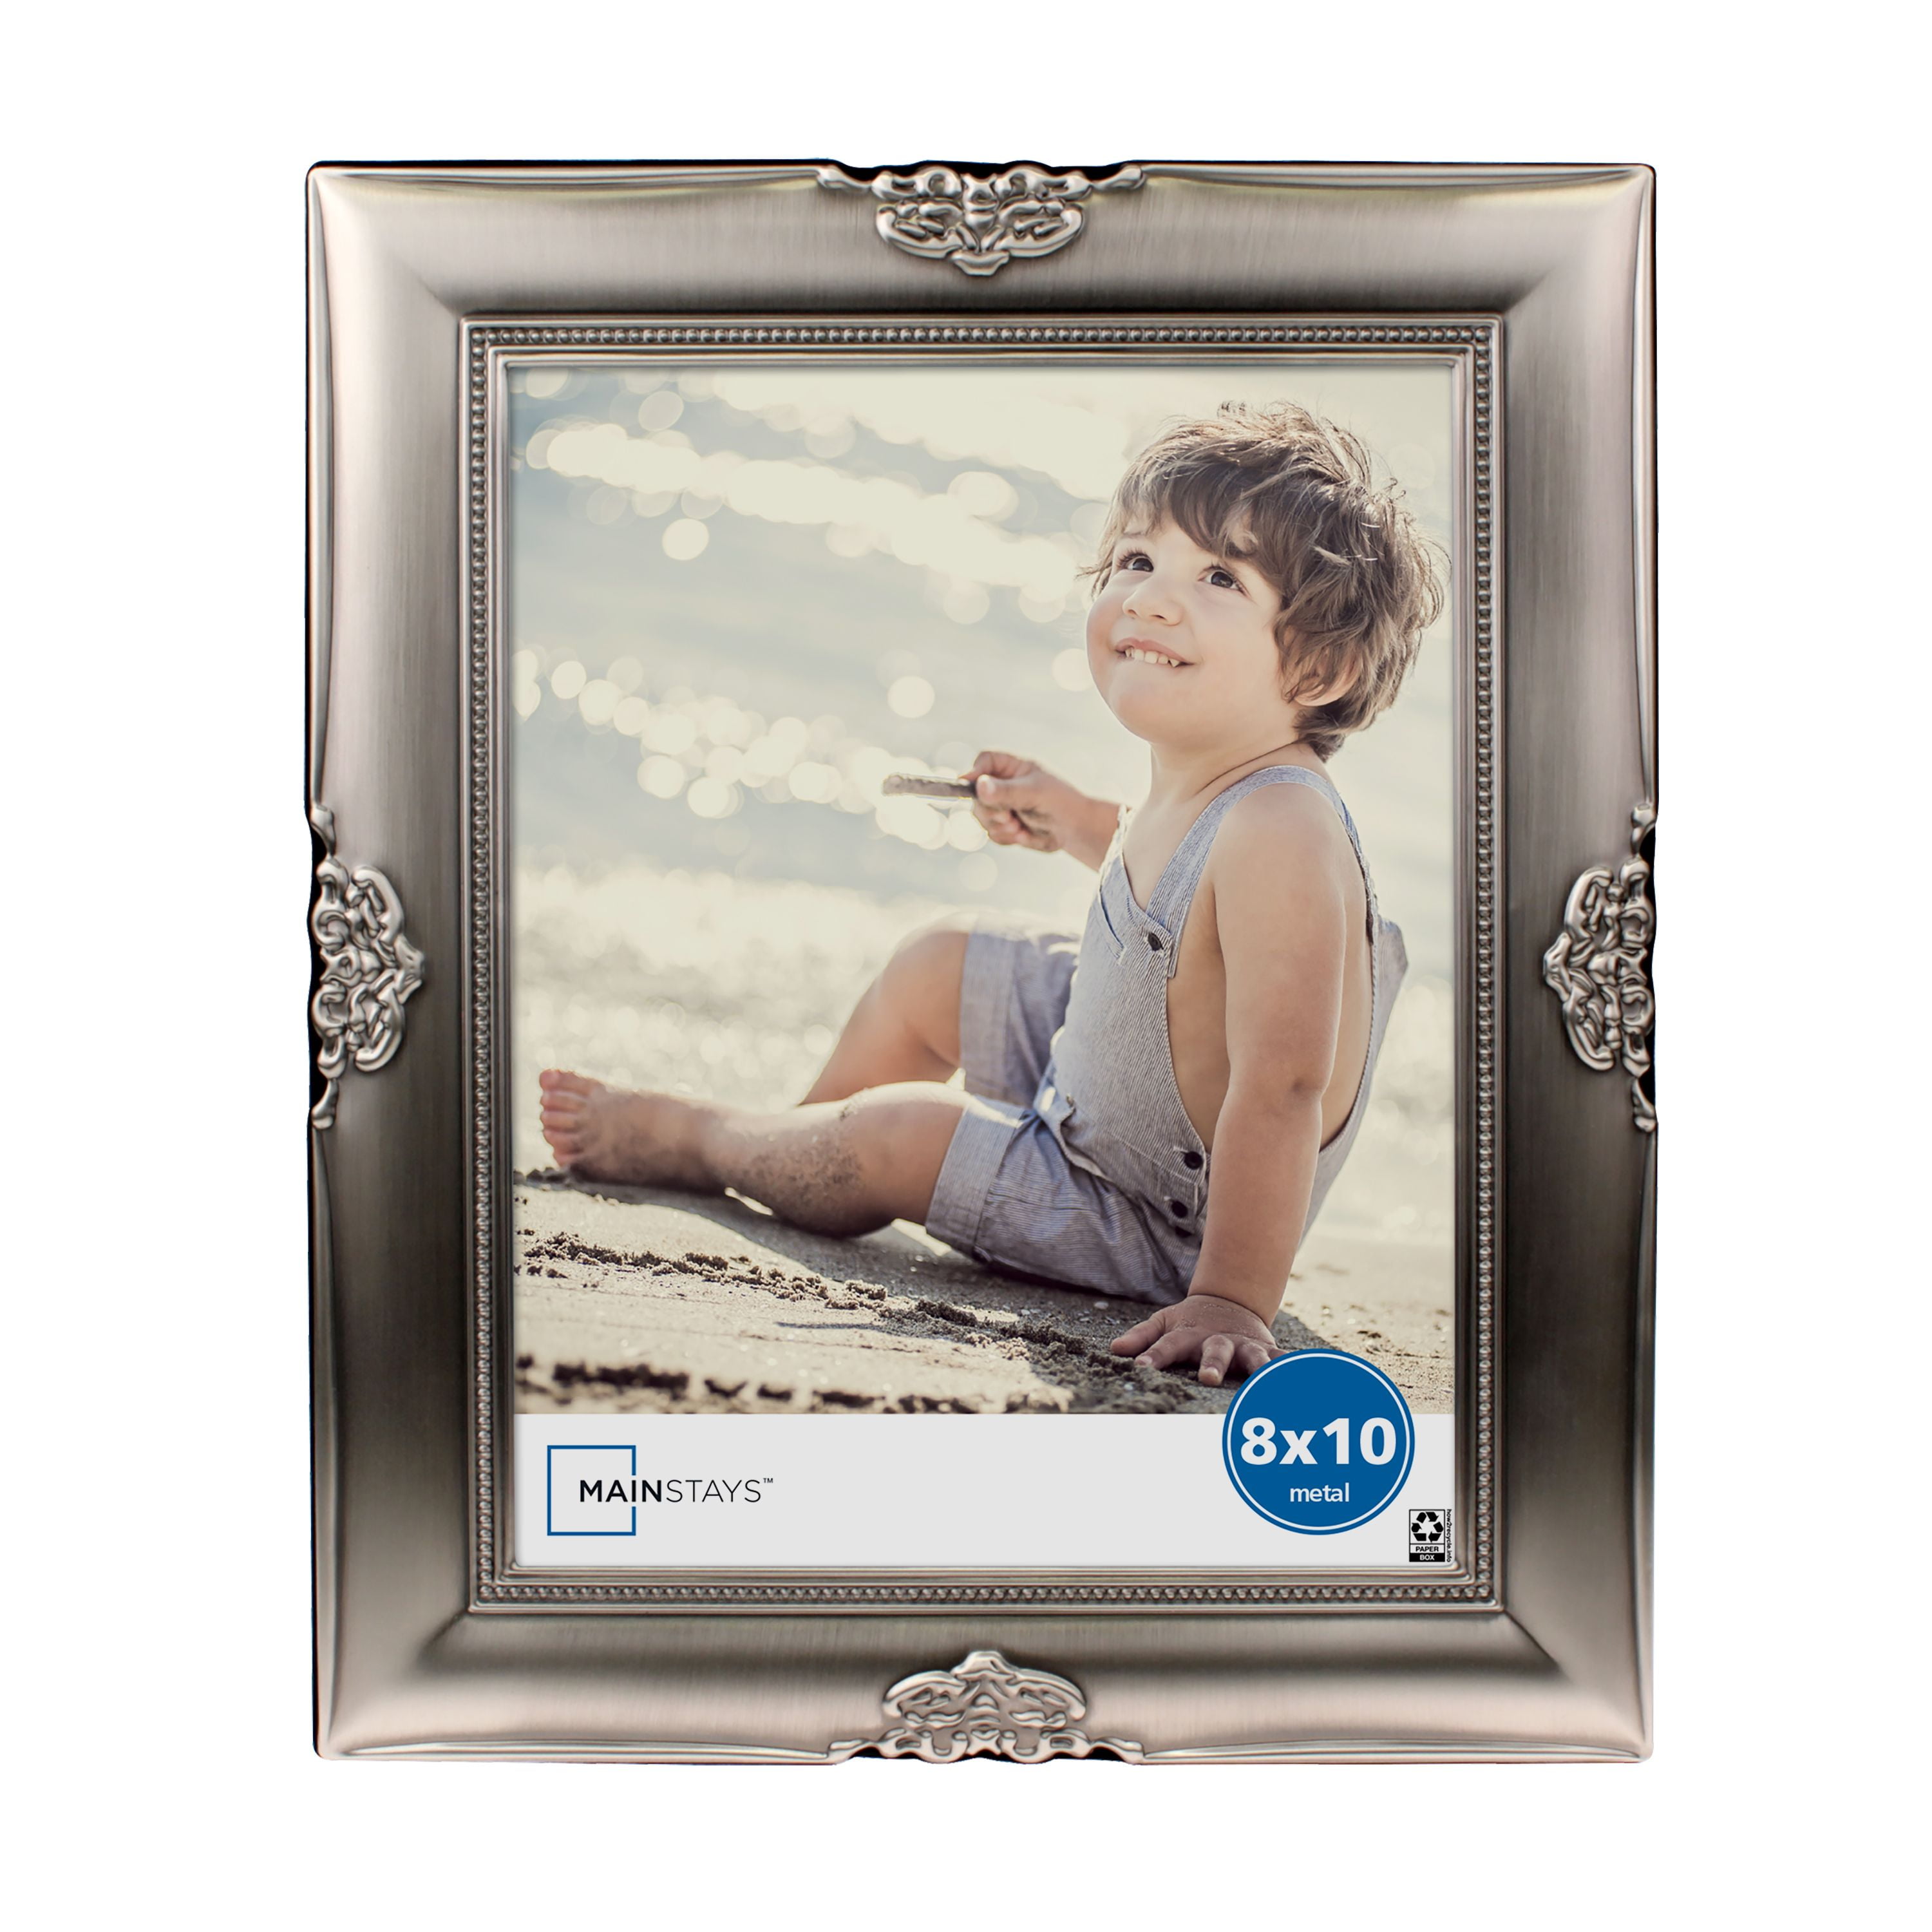 Stars In The Sky Mahogny 8 x 10 Wall And Tabletop Photo Frame